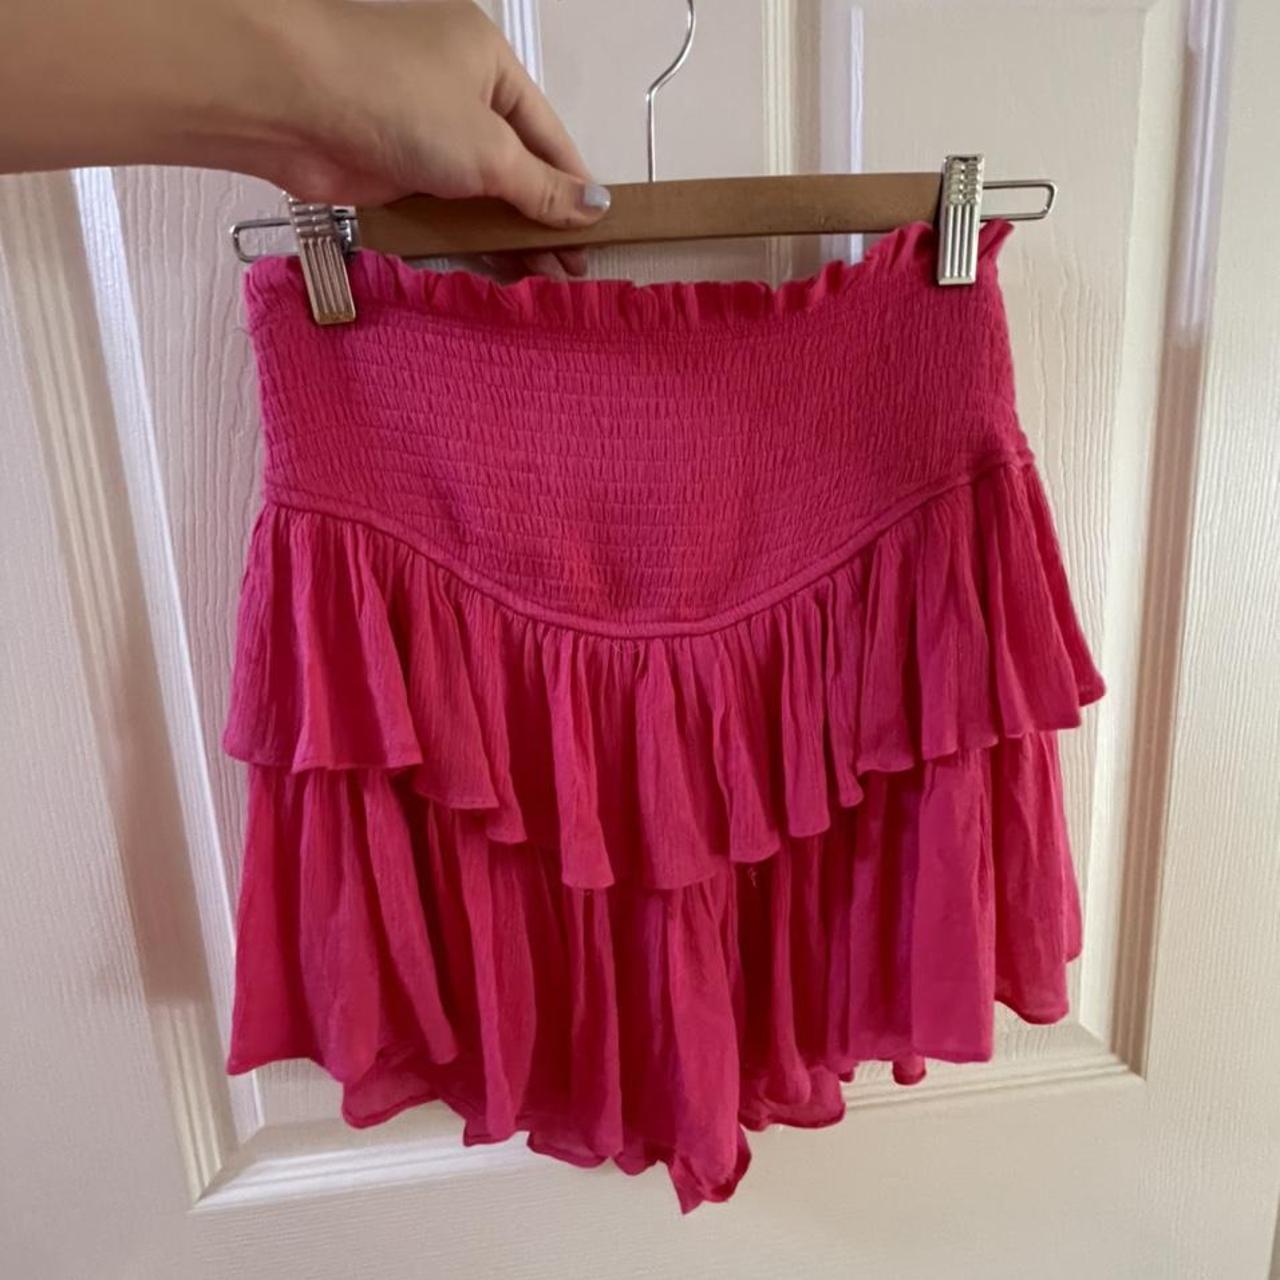 Product Image 3 - HOT PINK RUFFLE SKIRT

* can